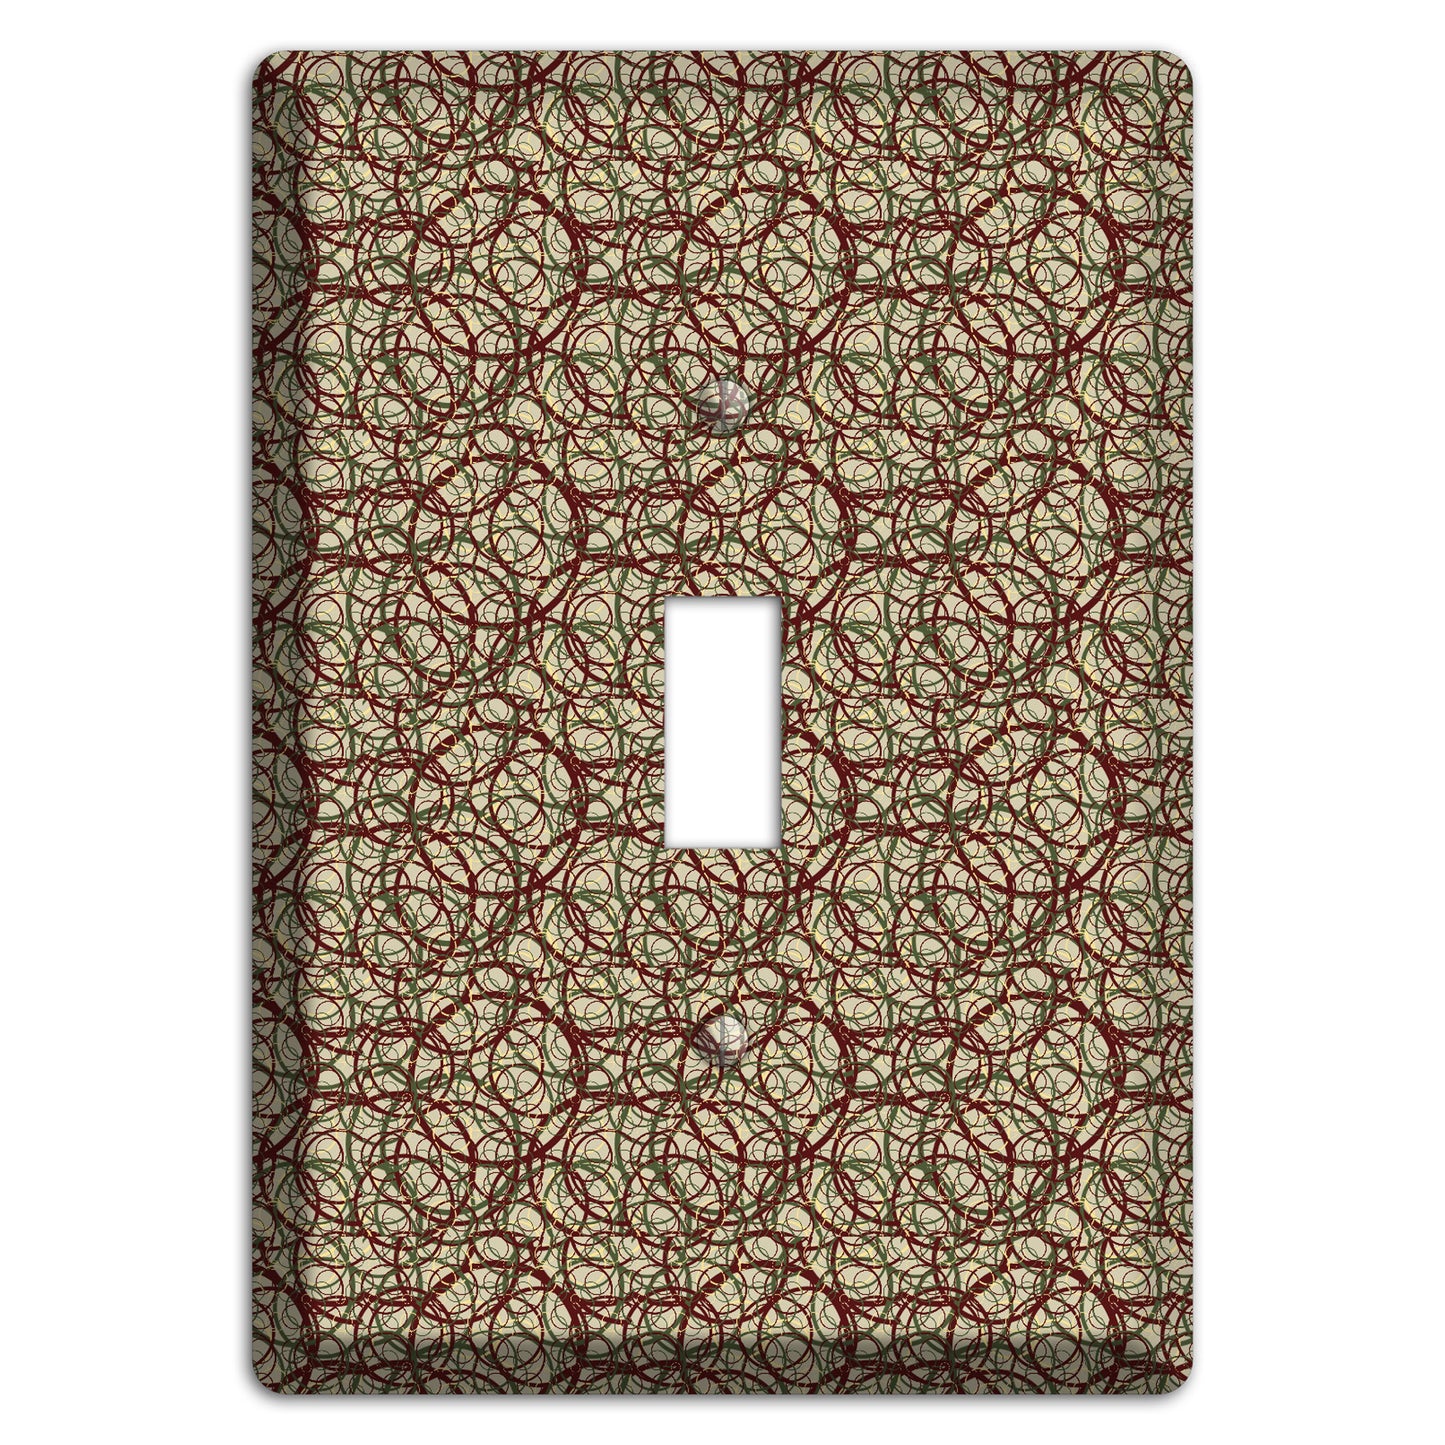 Brown and Burgundy Circles Cover Plates